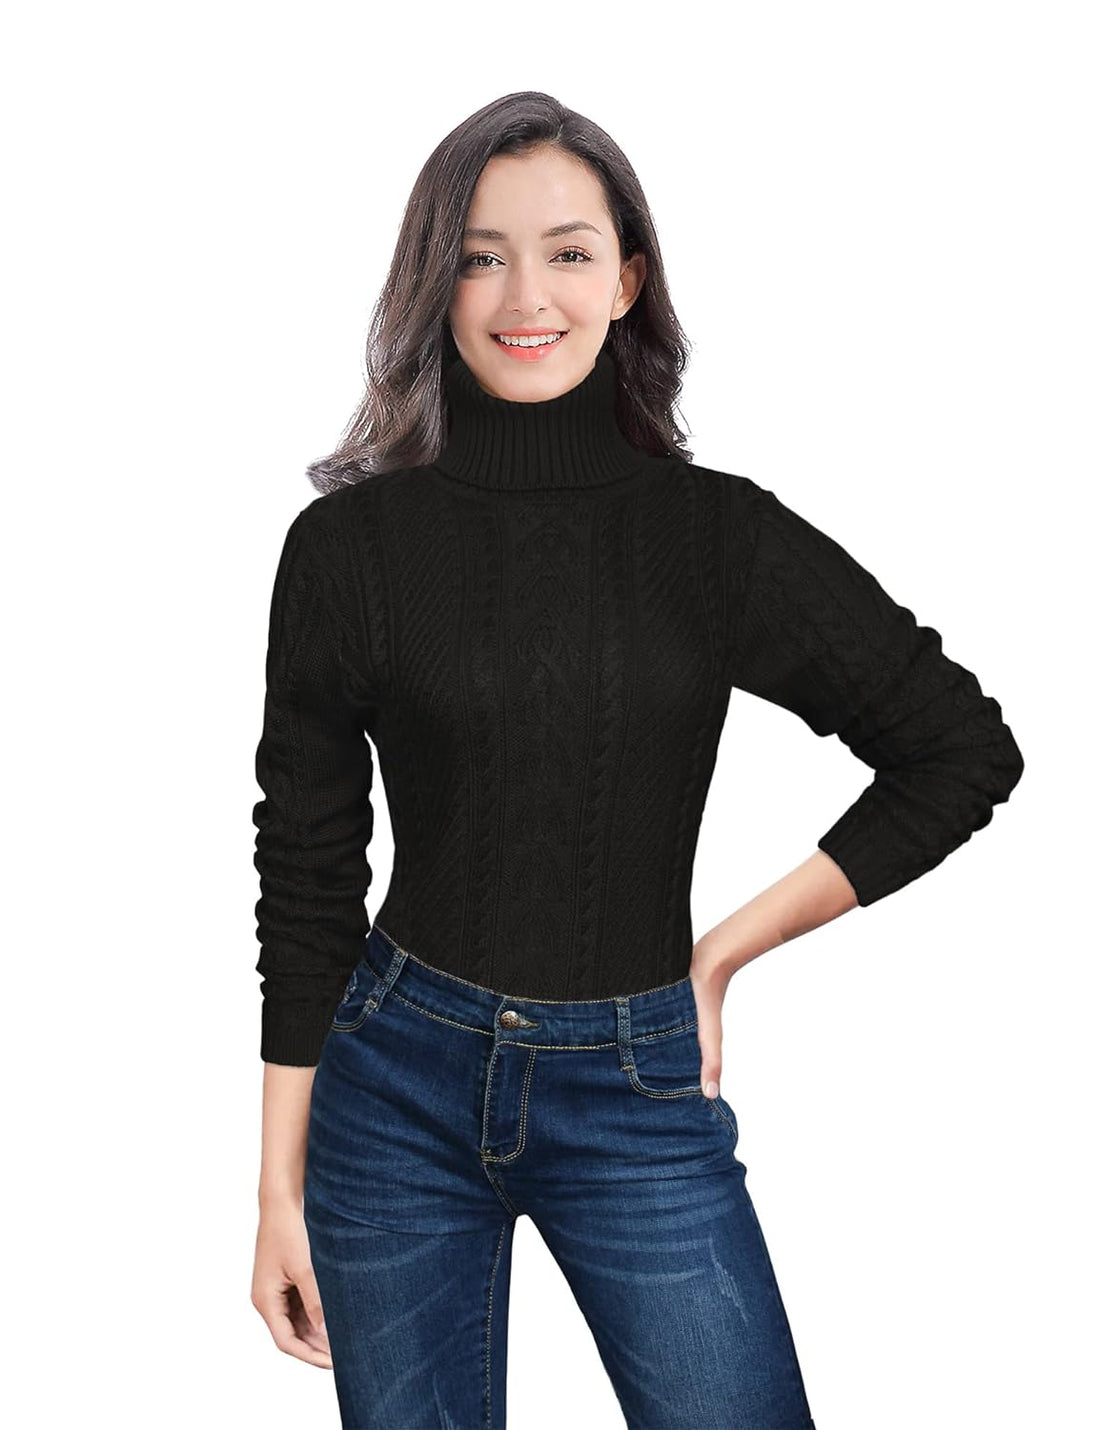 v28 Women Polo Neck Long Slim Fitted Dress Bodycon Turtleneck Cable Knit Sweater, Y Black, X-Large